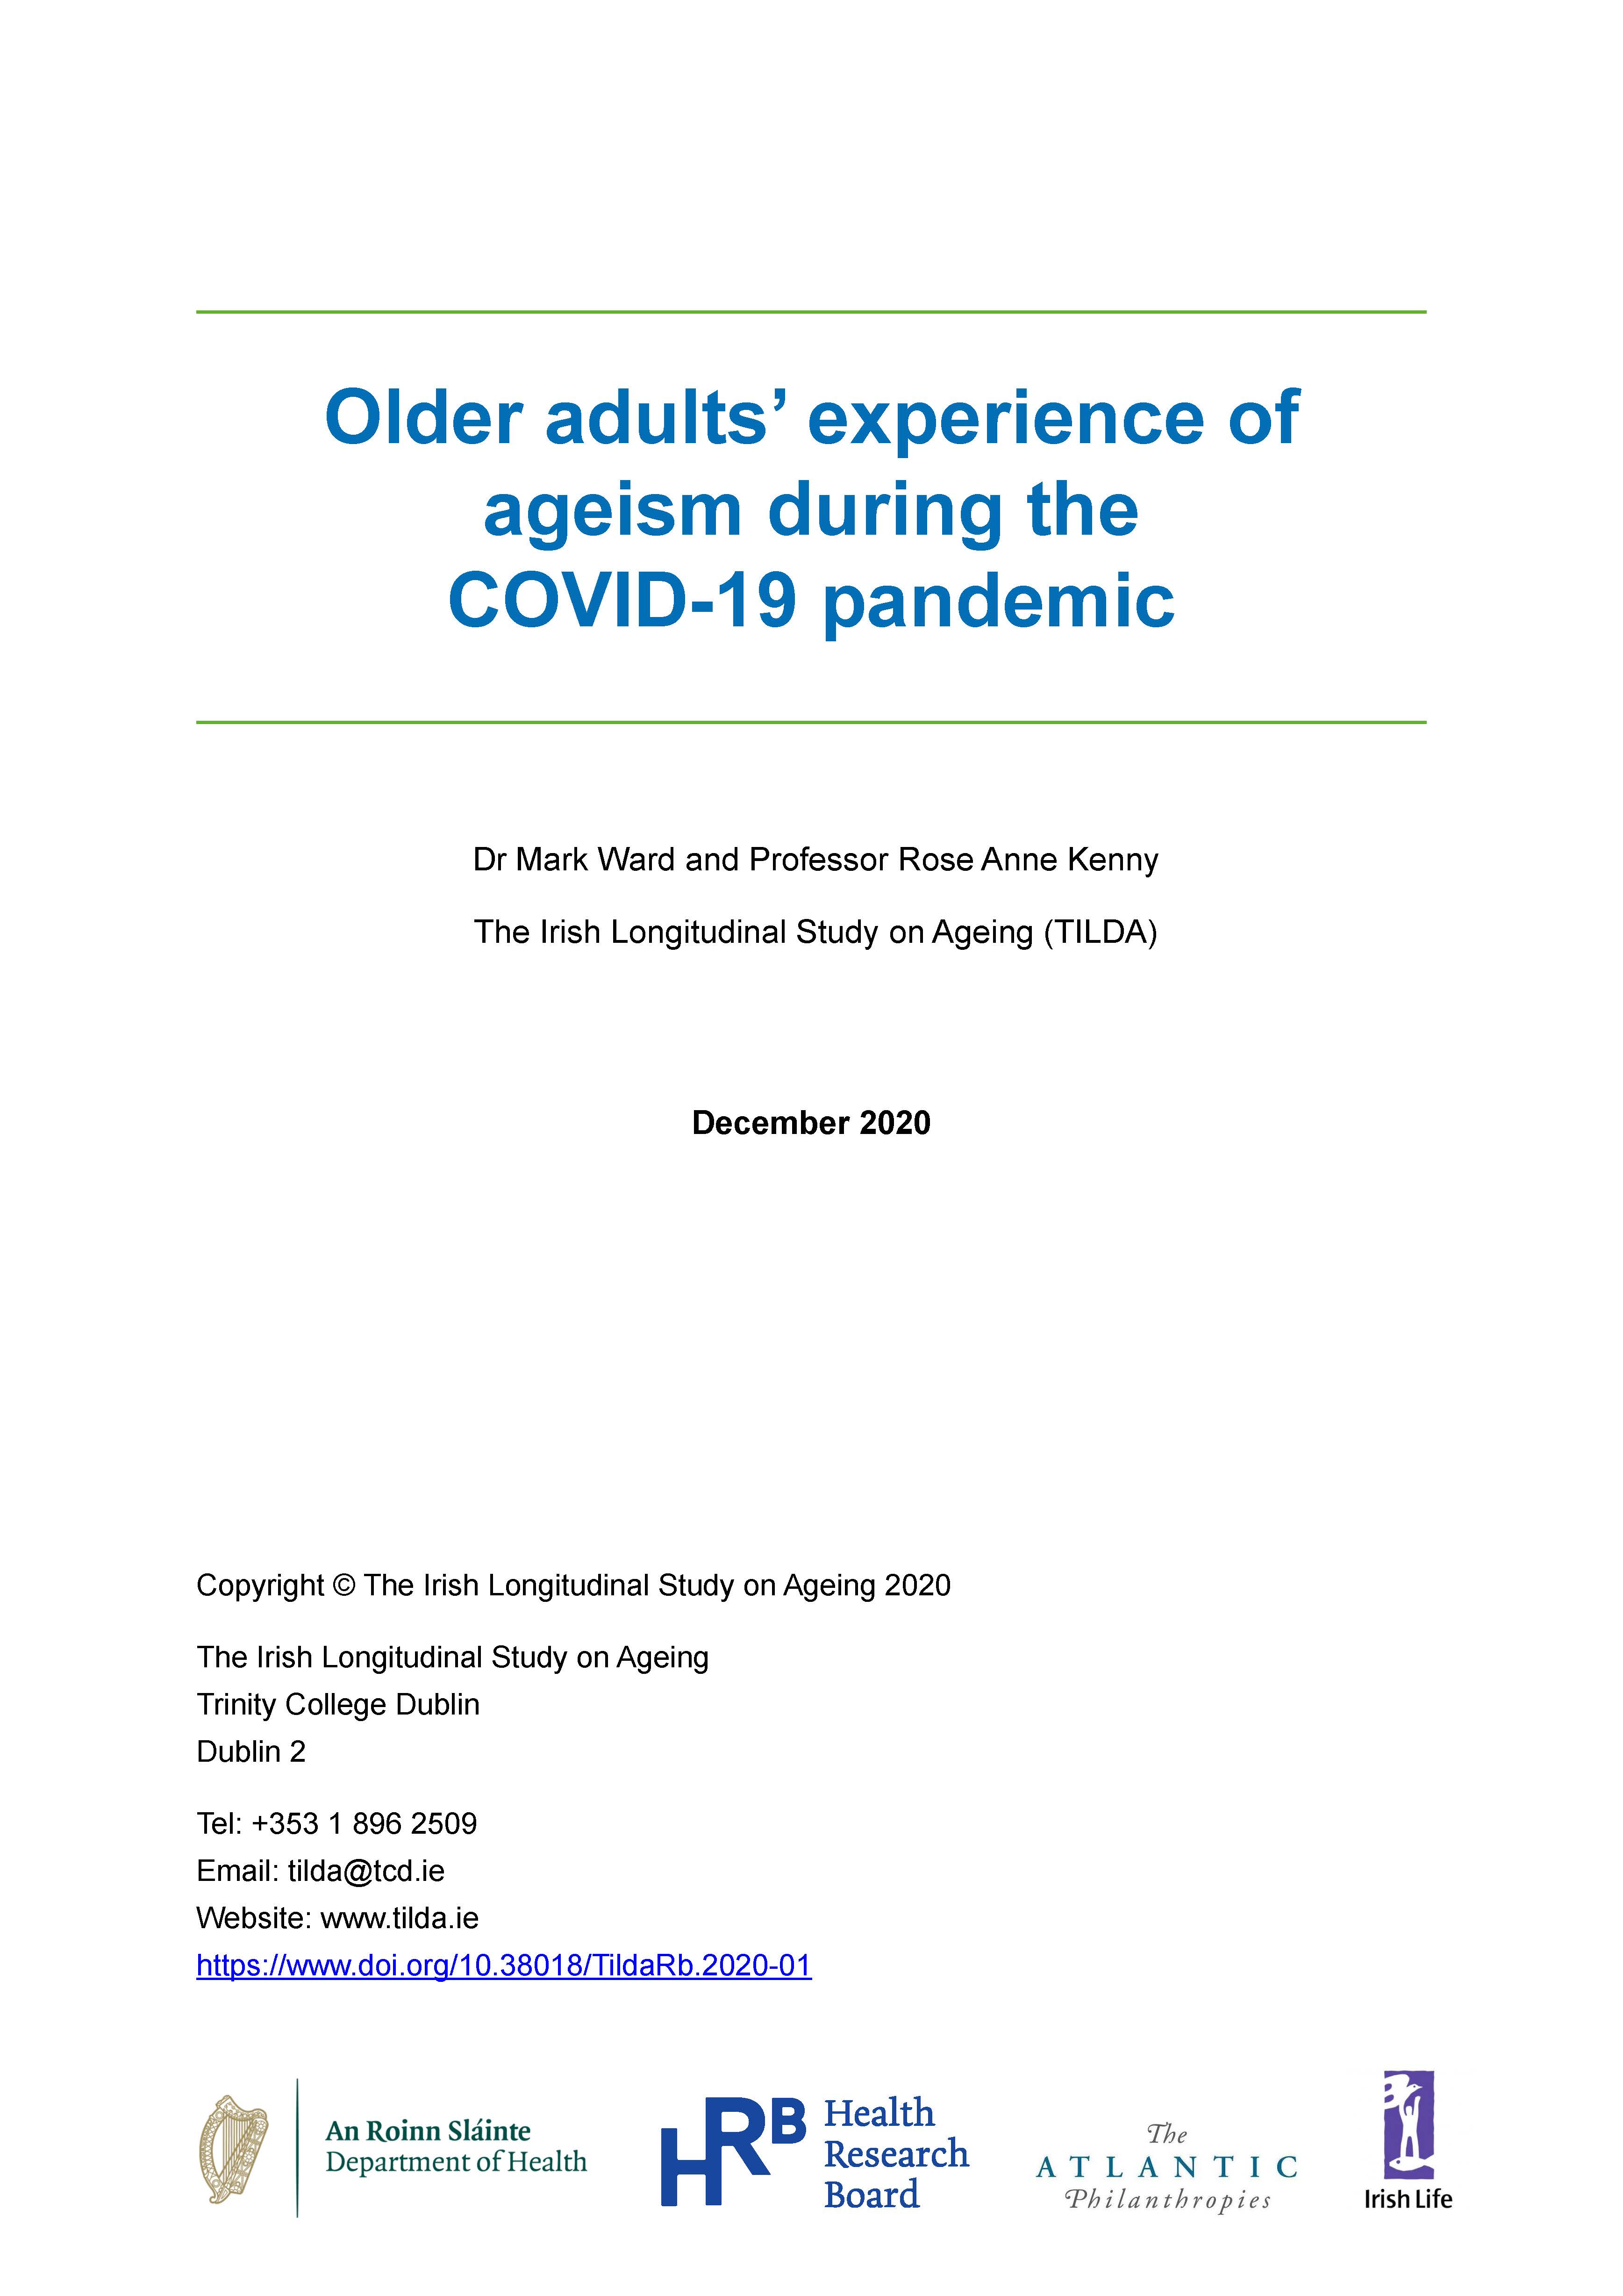 Covid-19 Ageism